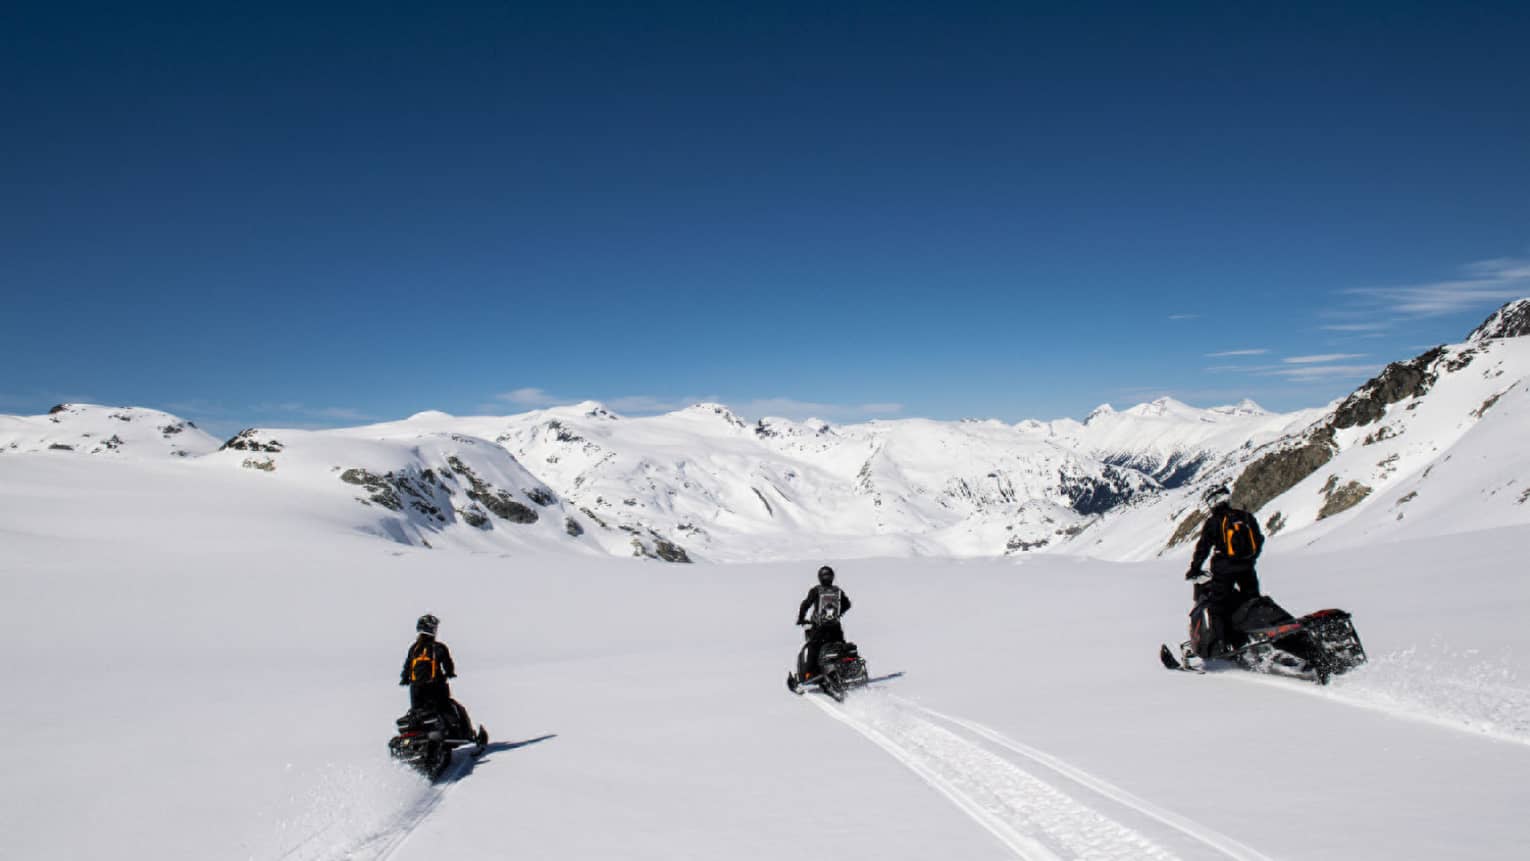 Three snowmobilers ride on pristine snow toward majestic snowy mountains and clear blue sky, leaving tracks in their wake.